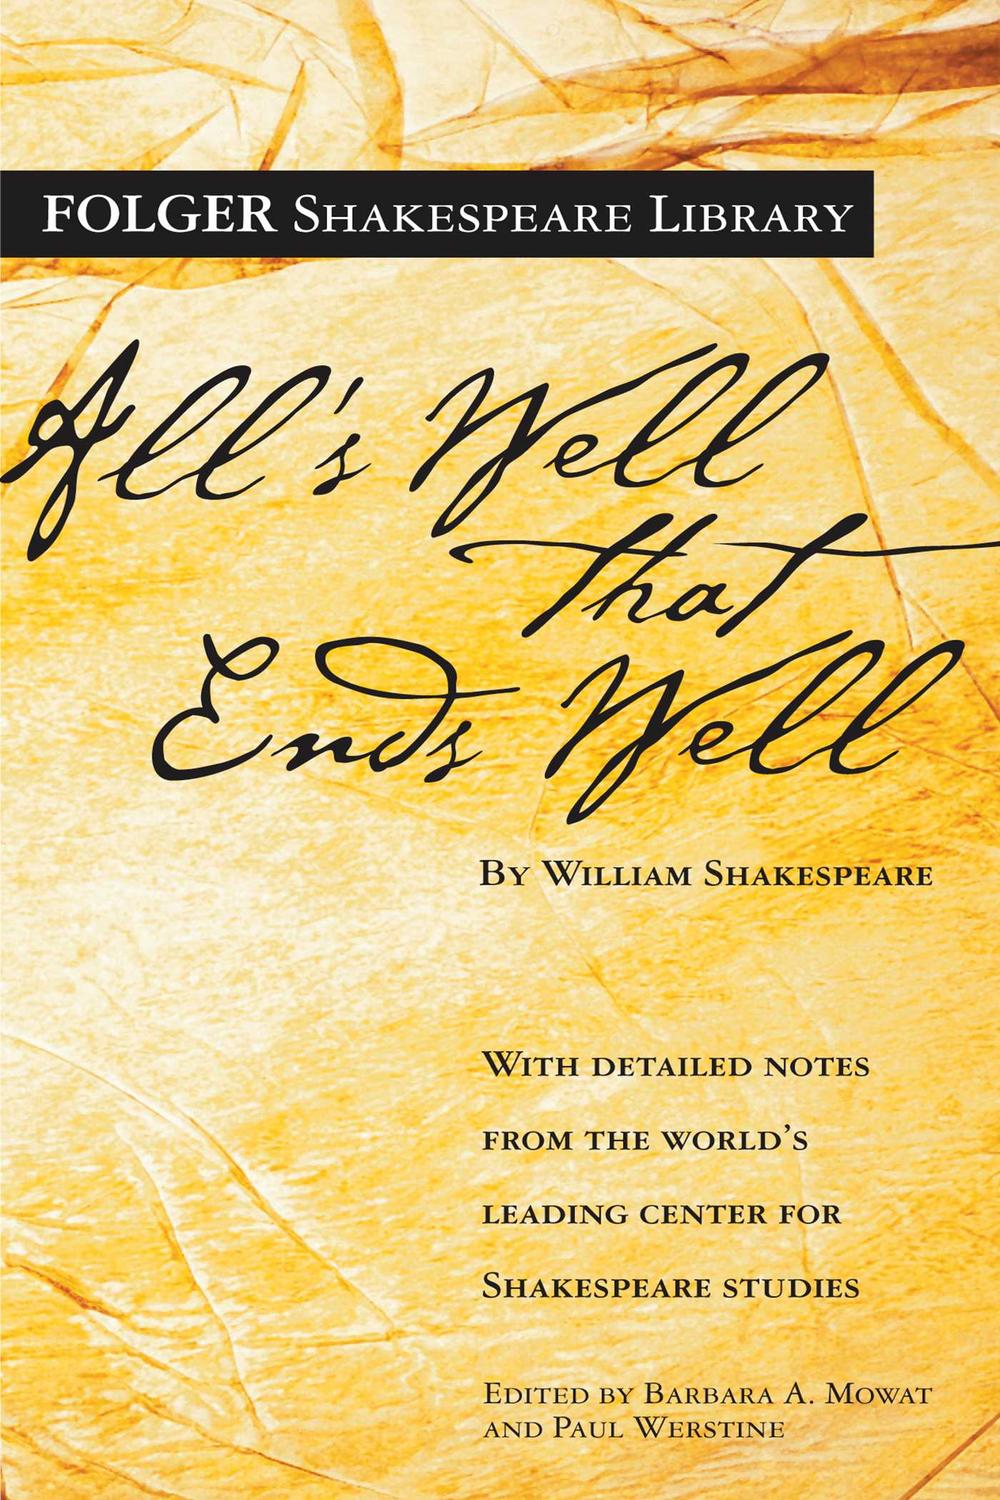 All's Well That Ends Well - William Shakespeare, Dr. Barbara A. Mowat, Paul Werstine